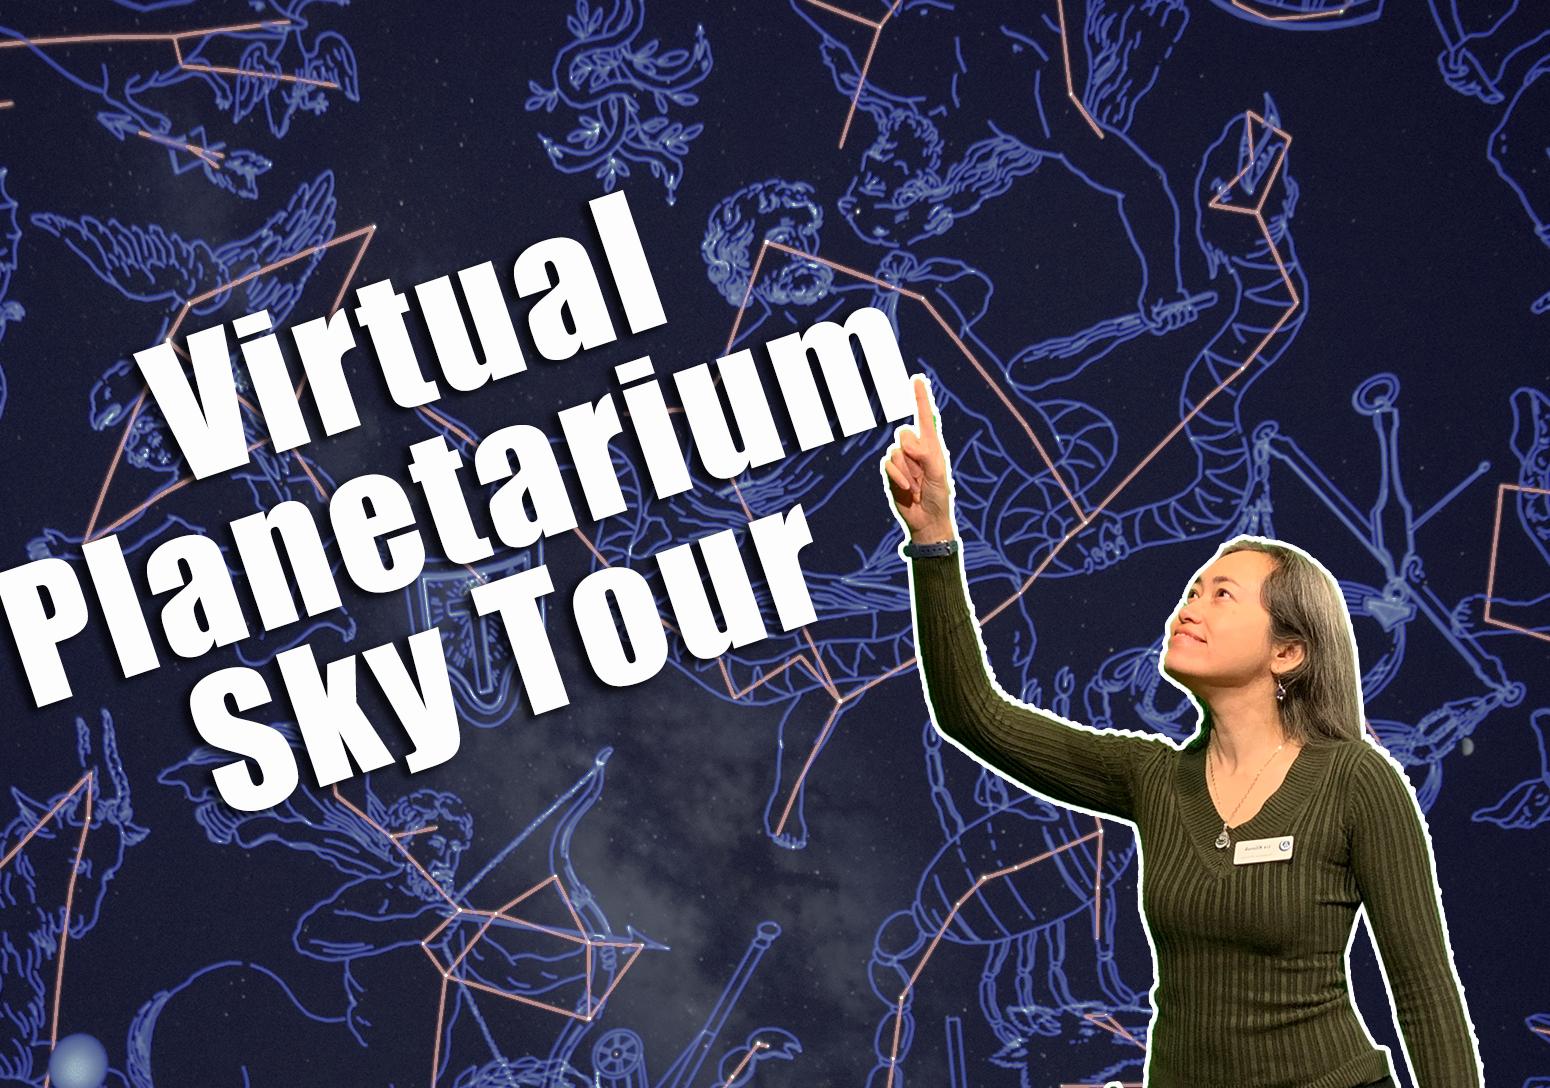 Woman pointing out constellations with text Virtual Planetarium Sky Tour